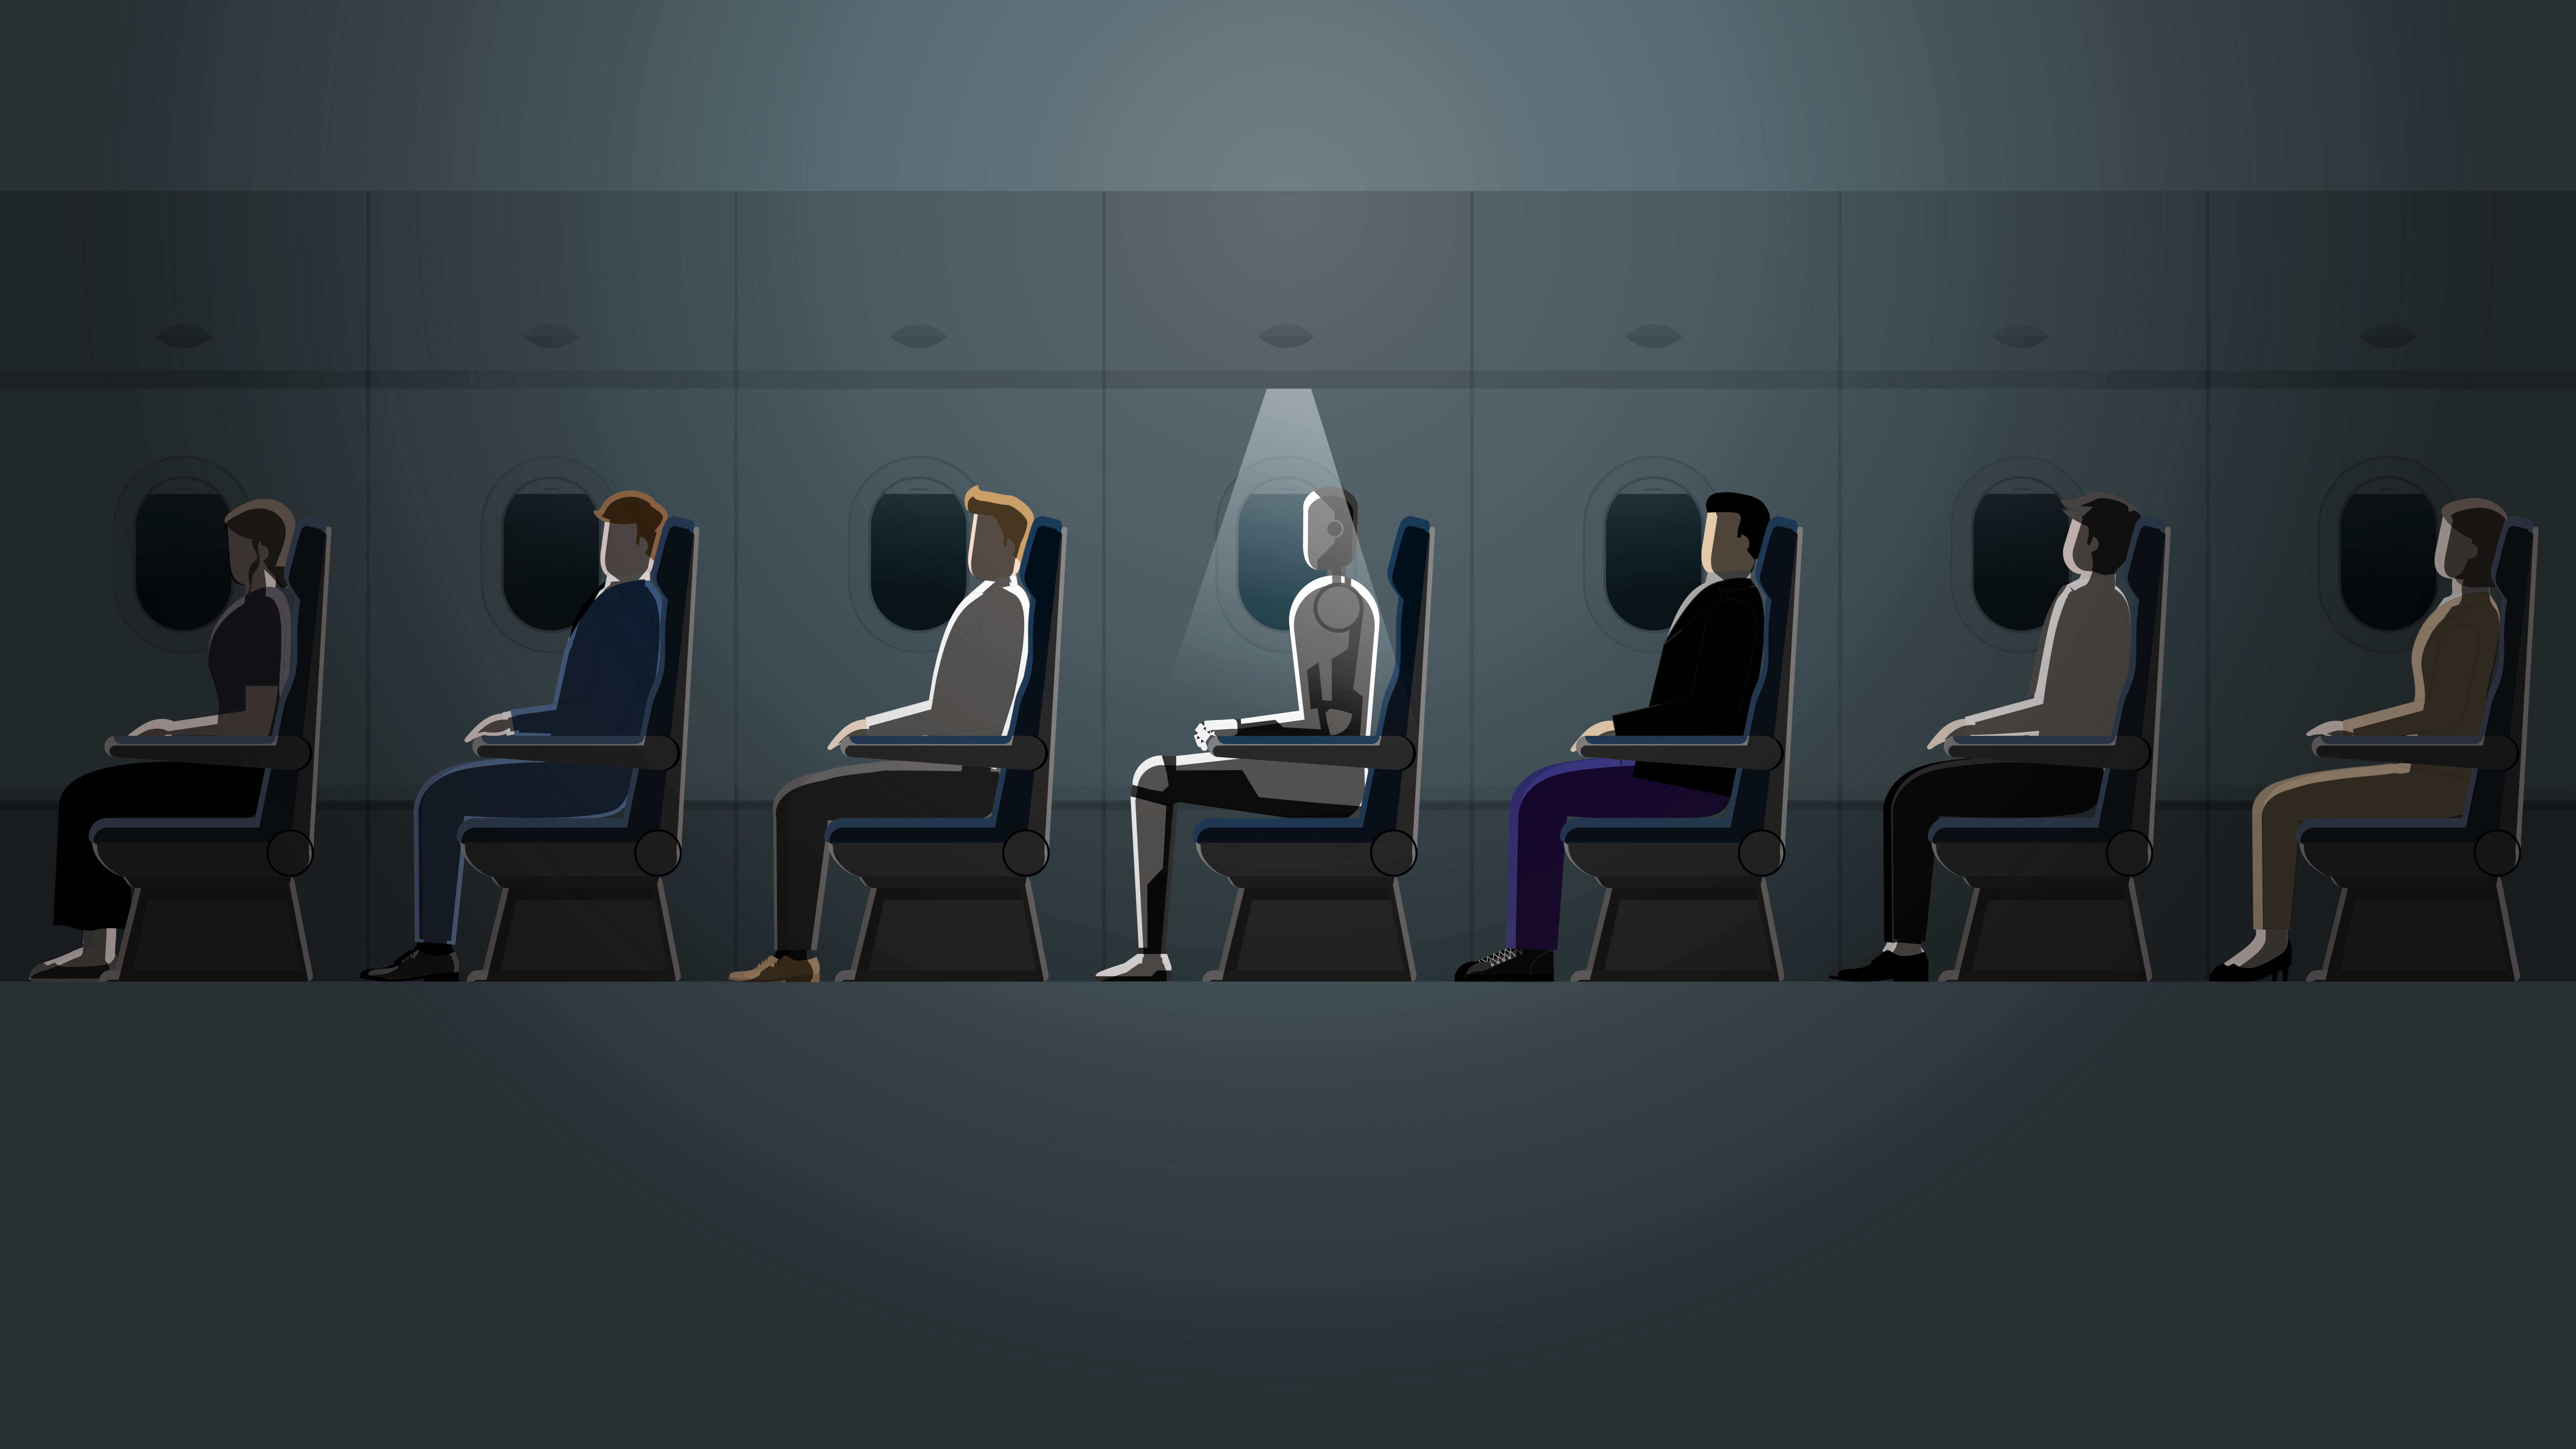 The future technology concept, cyborg will be a part of people's daily life. A robot sitting awake in a plane cabin in the dark by a small light while other passengers such as businessmen are asleep